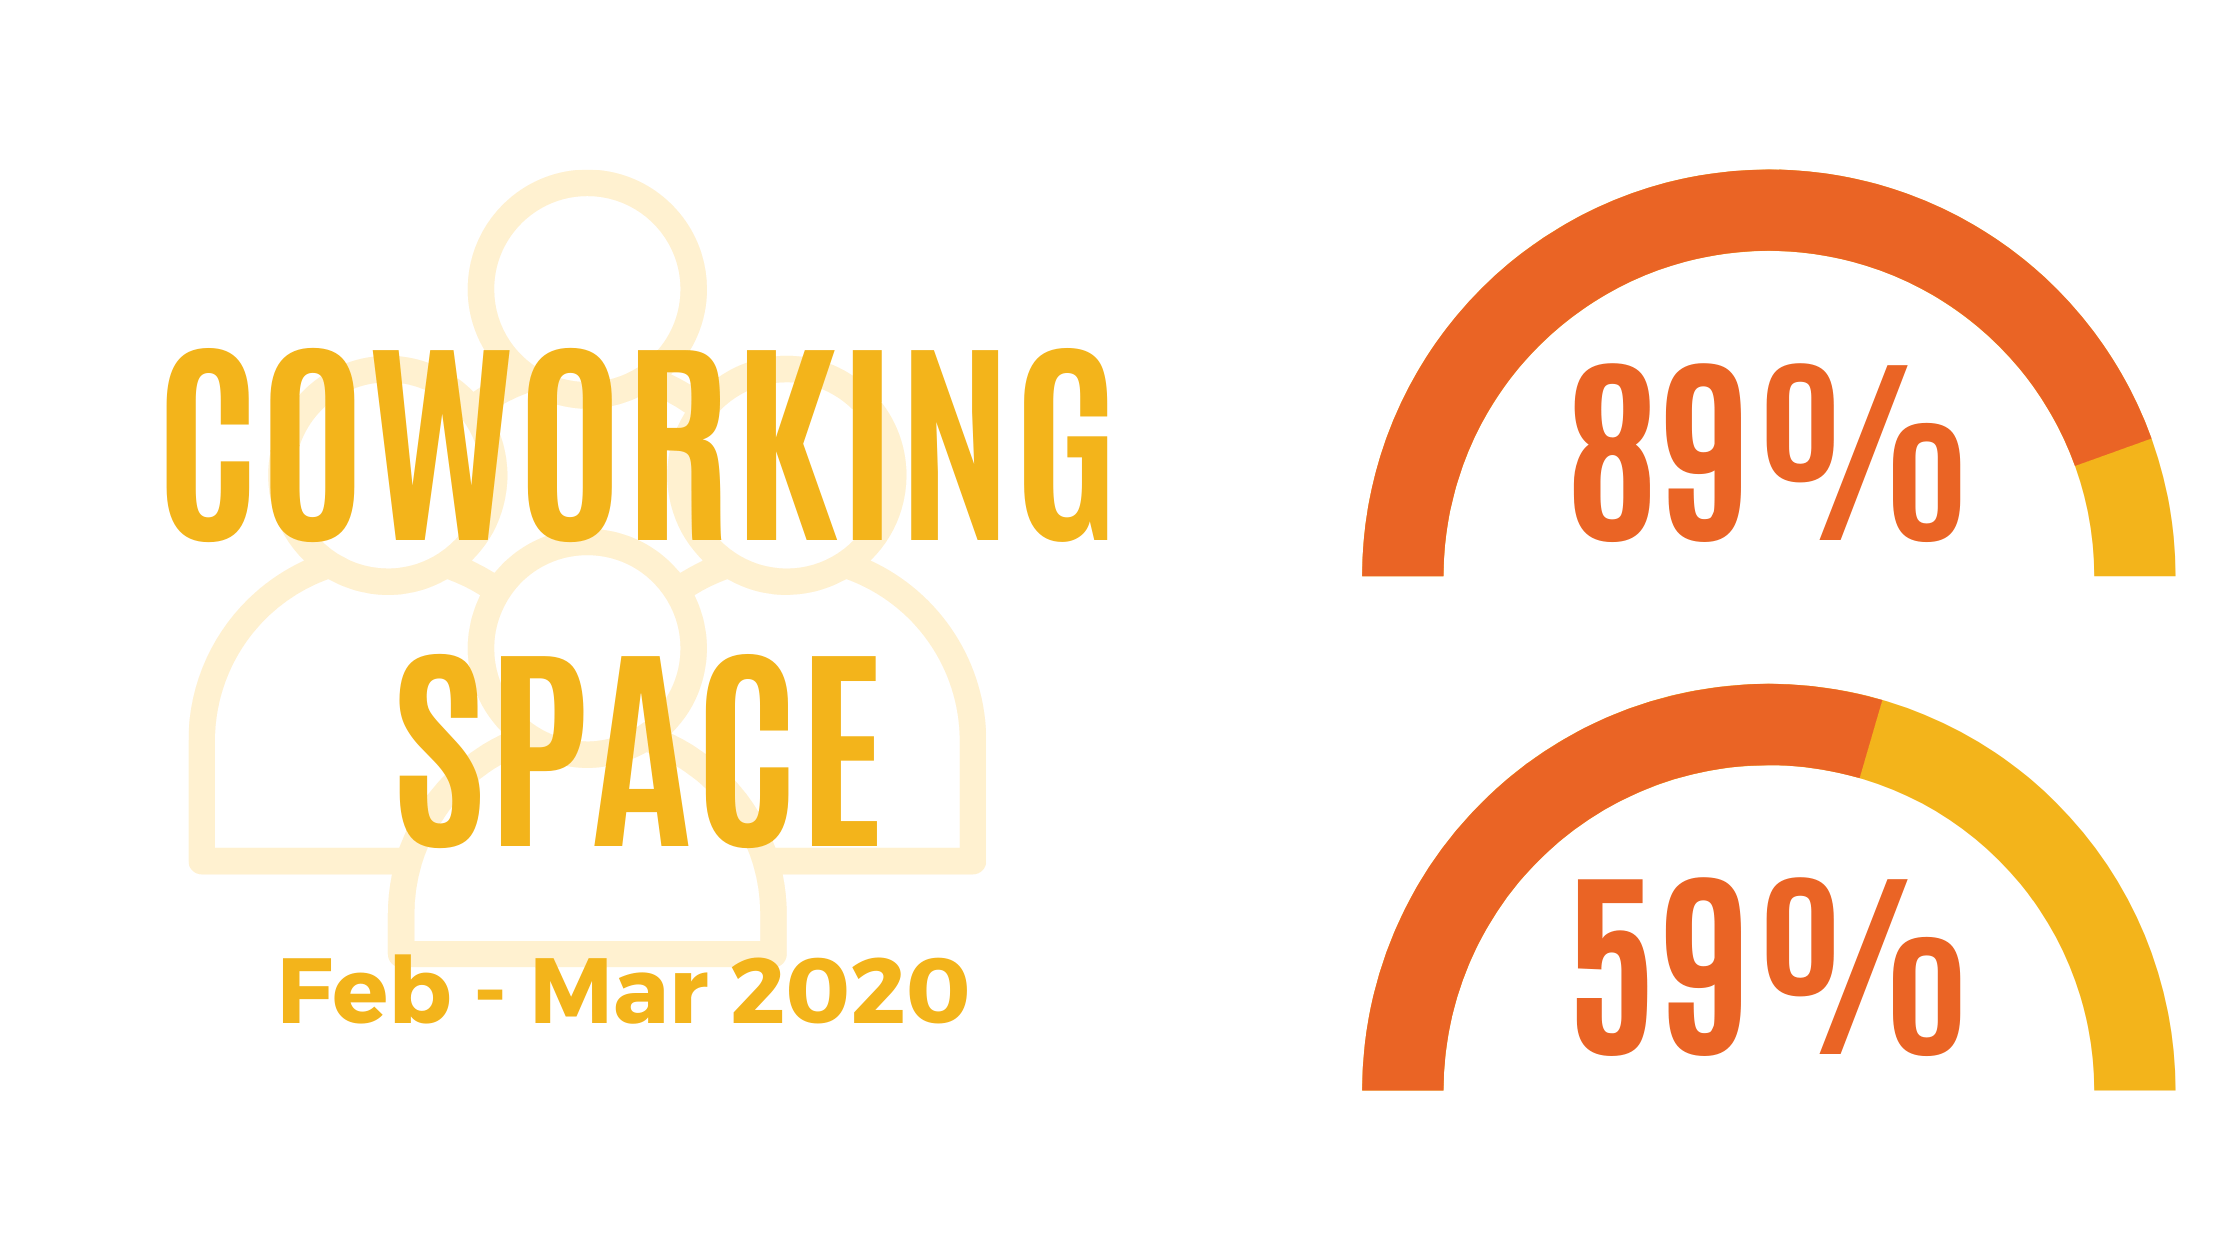 Coworking Space - February to March 2020